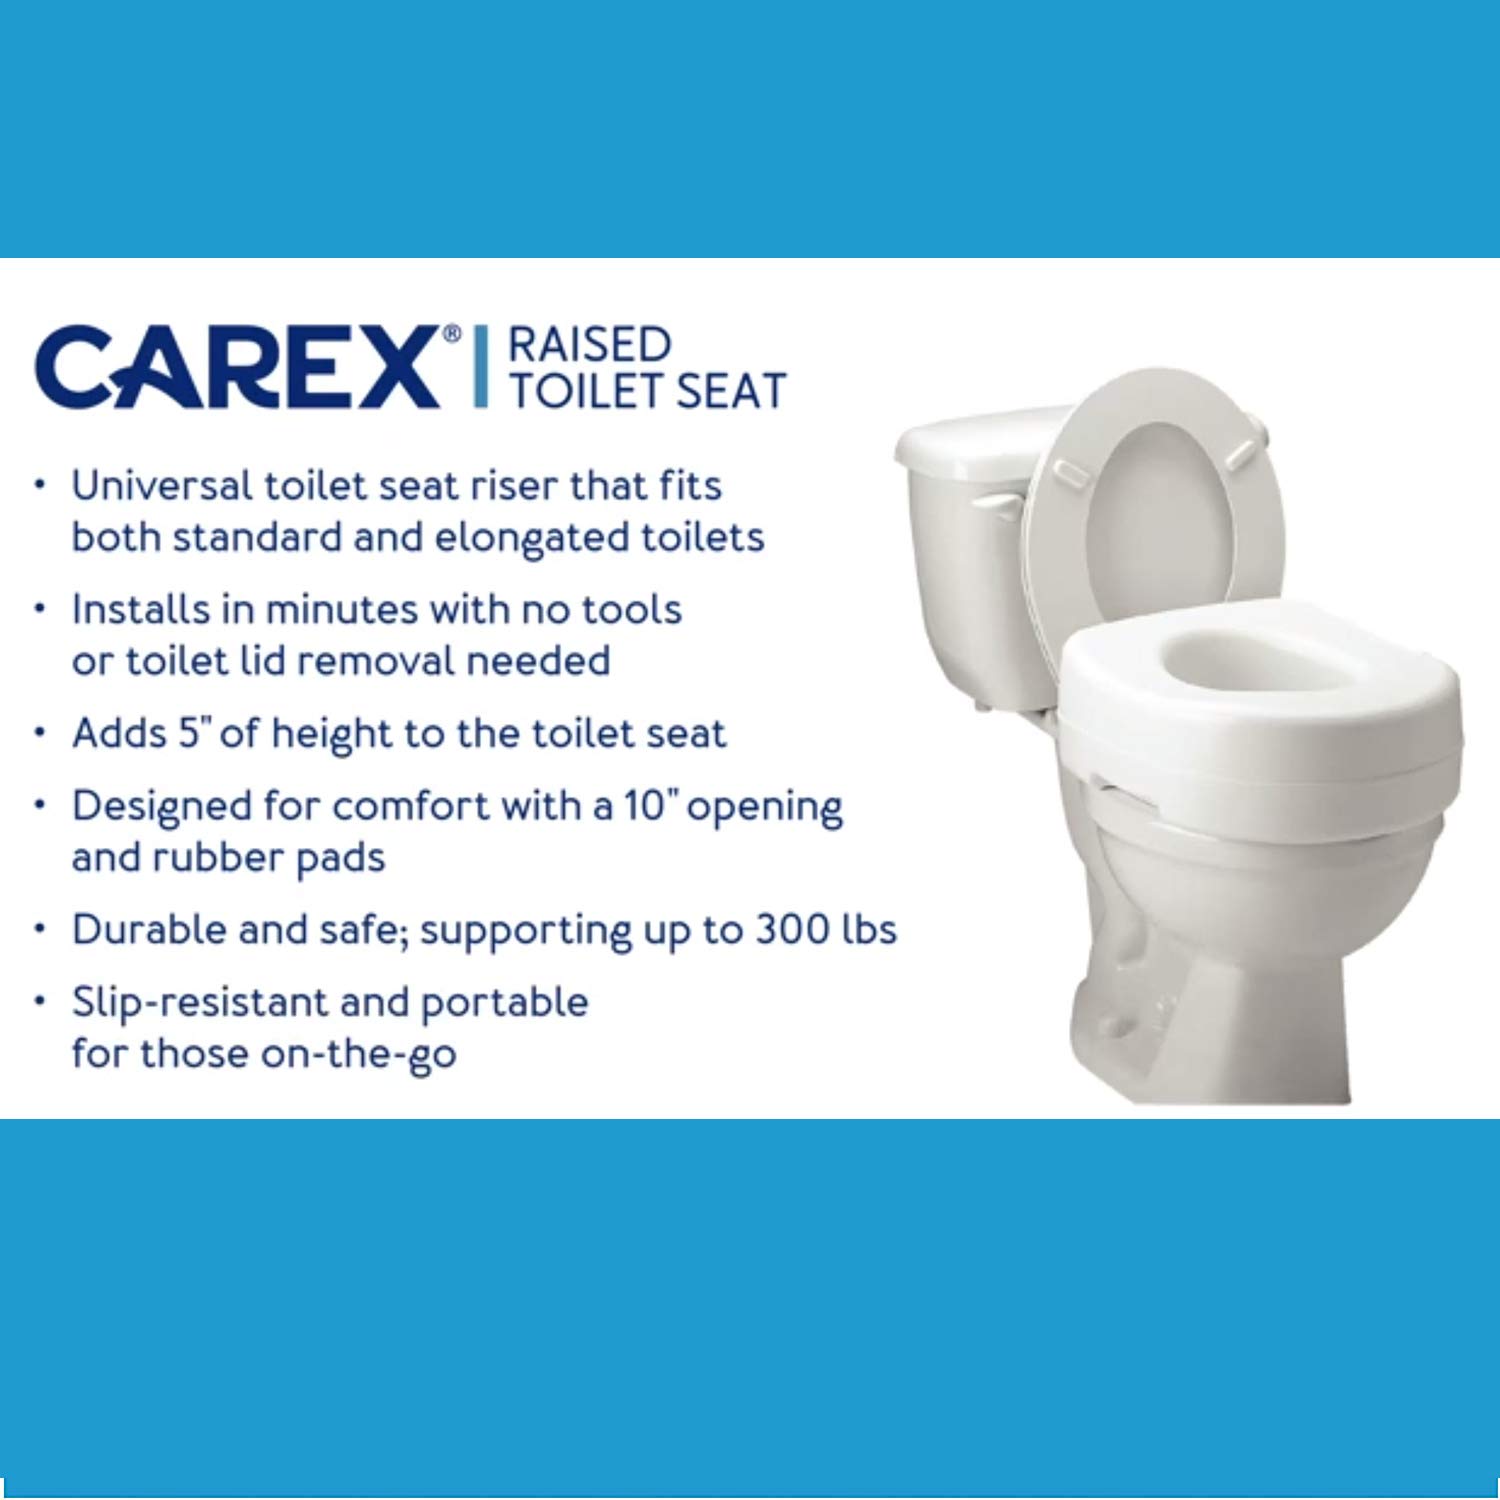 Carex Toilet Seat Riser - Adds 5 Inch of Height to Toilet - Raised Toilet Seat With 300 Pound Weight Capacity - Slip-Resistant (White)